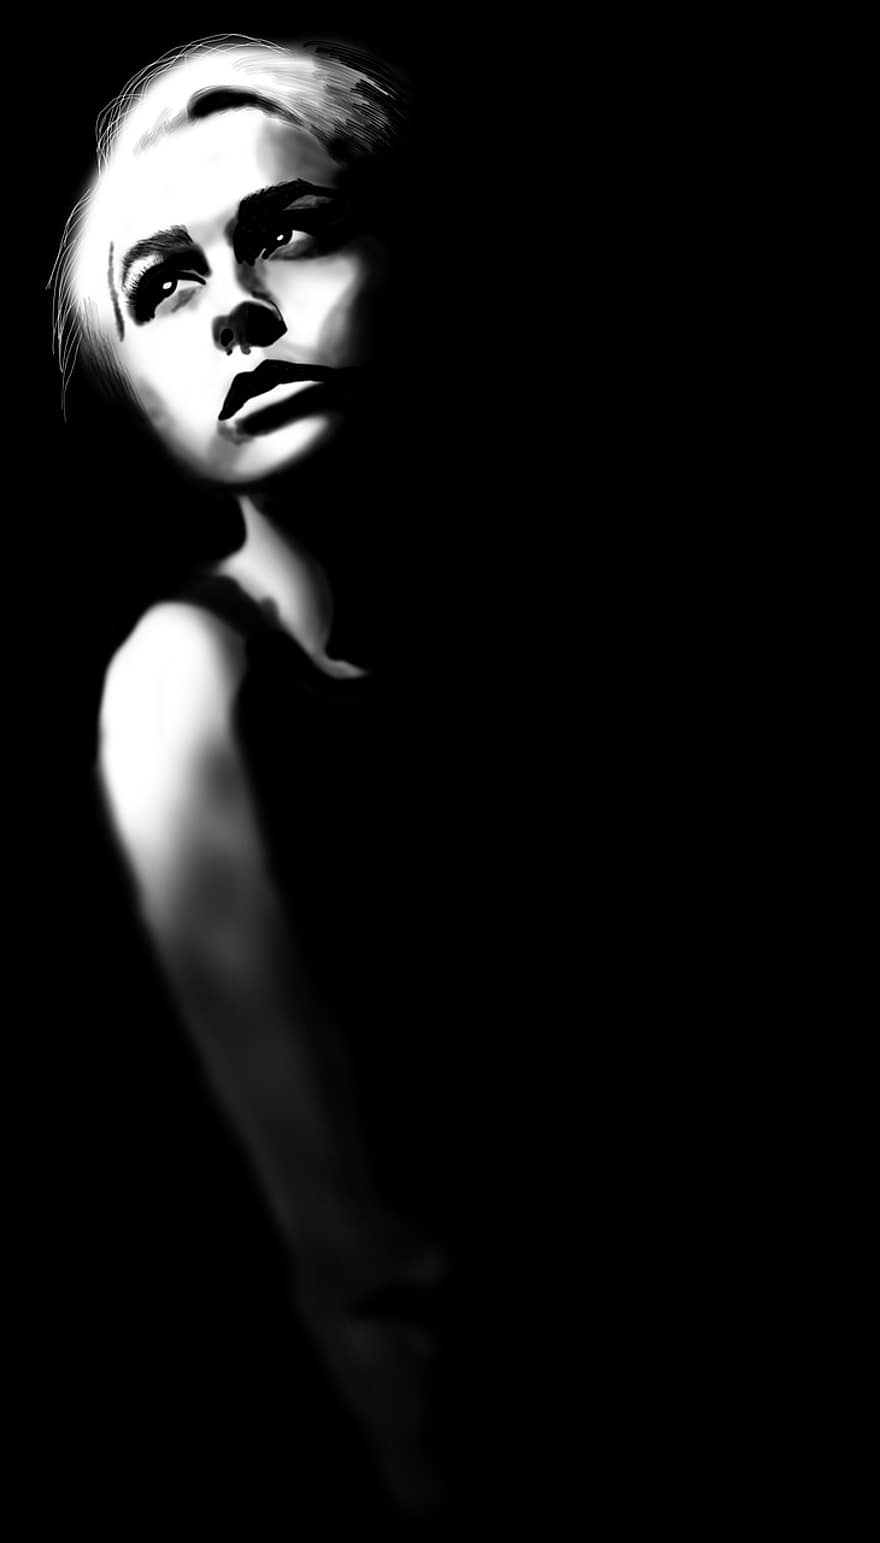 Woman, Portrait, Black And White, Shadow, Face, Girl, Pose, Light